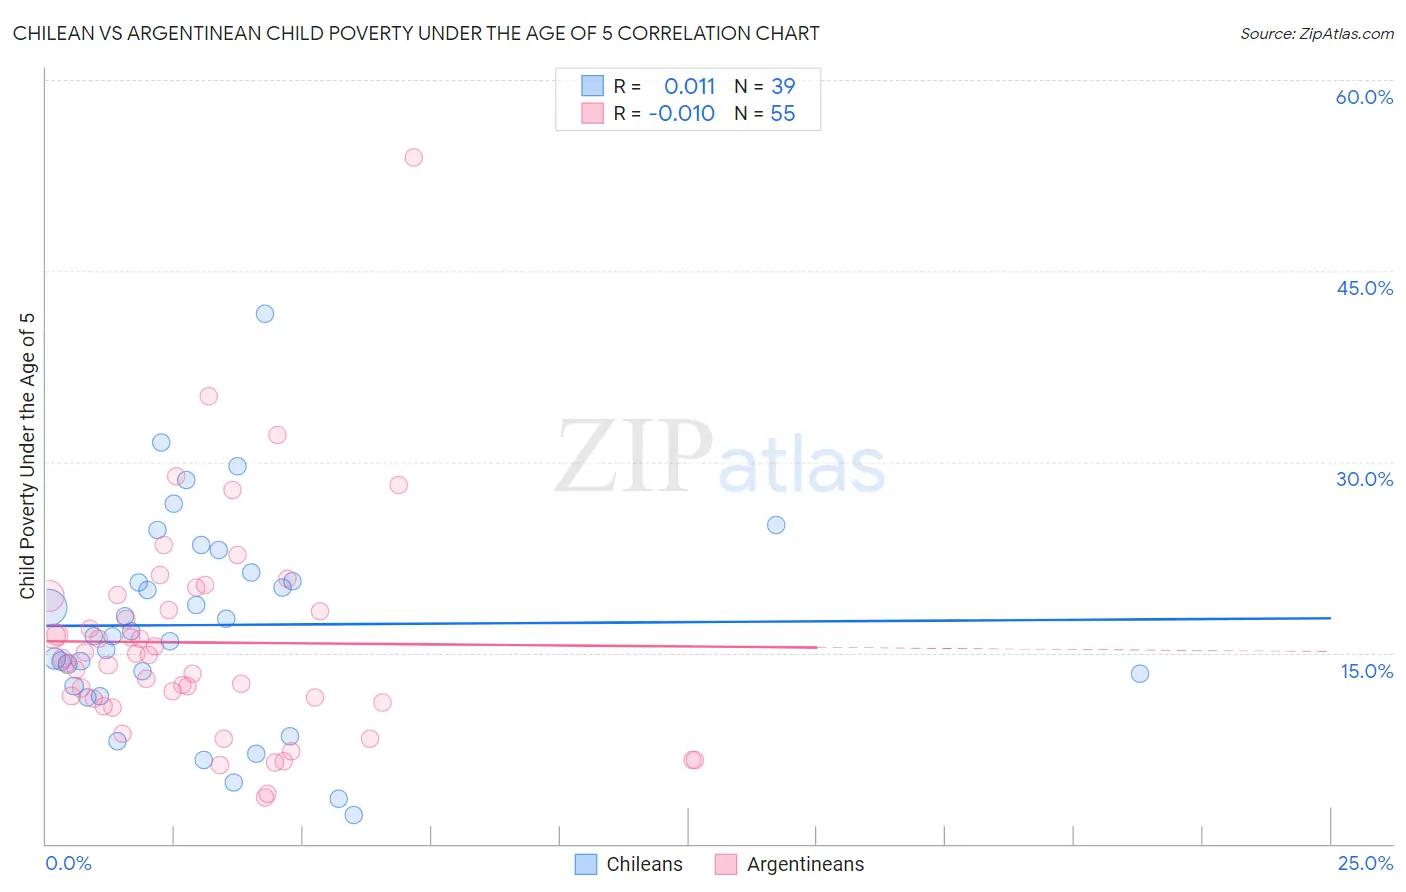 Chilean vs Argentinean Child Poverty Under the Age of 5